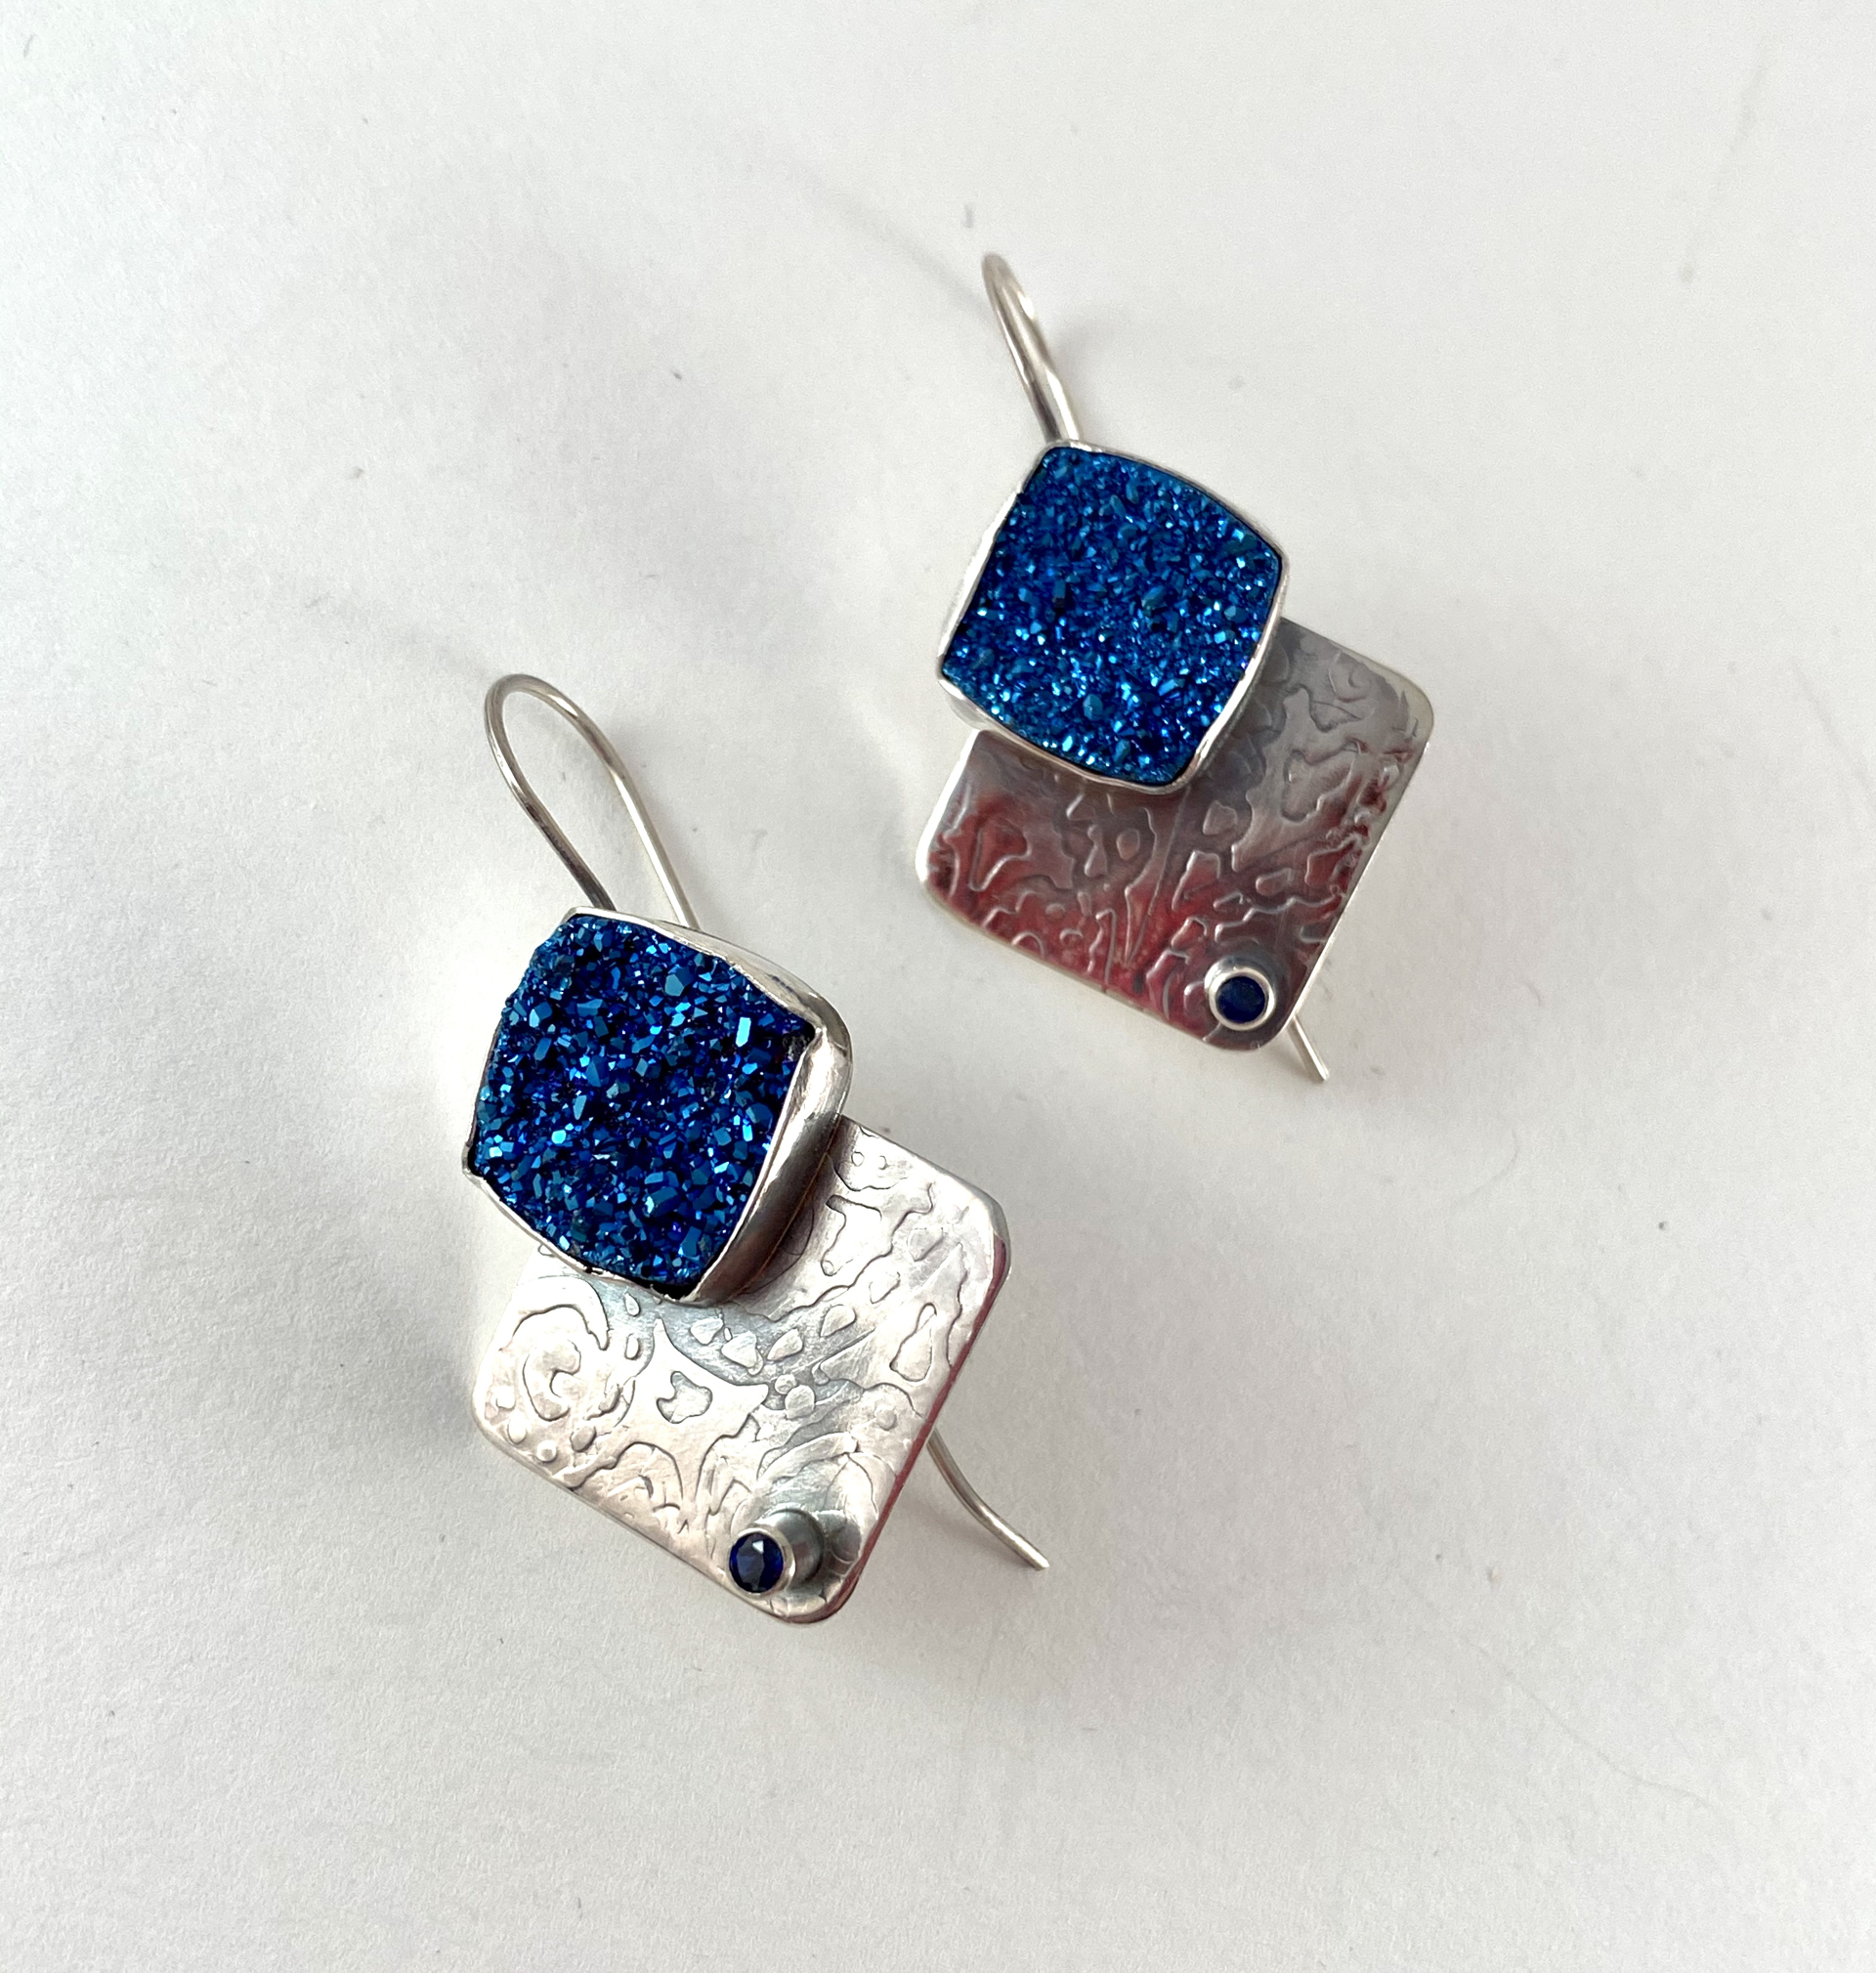 Hand Textured Silver, Titanium Druzy Earrings with synthetic sapphire accent, #120 by Anne Bivens